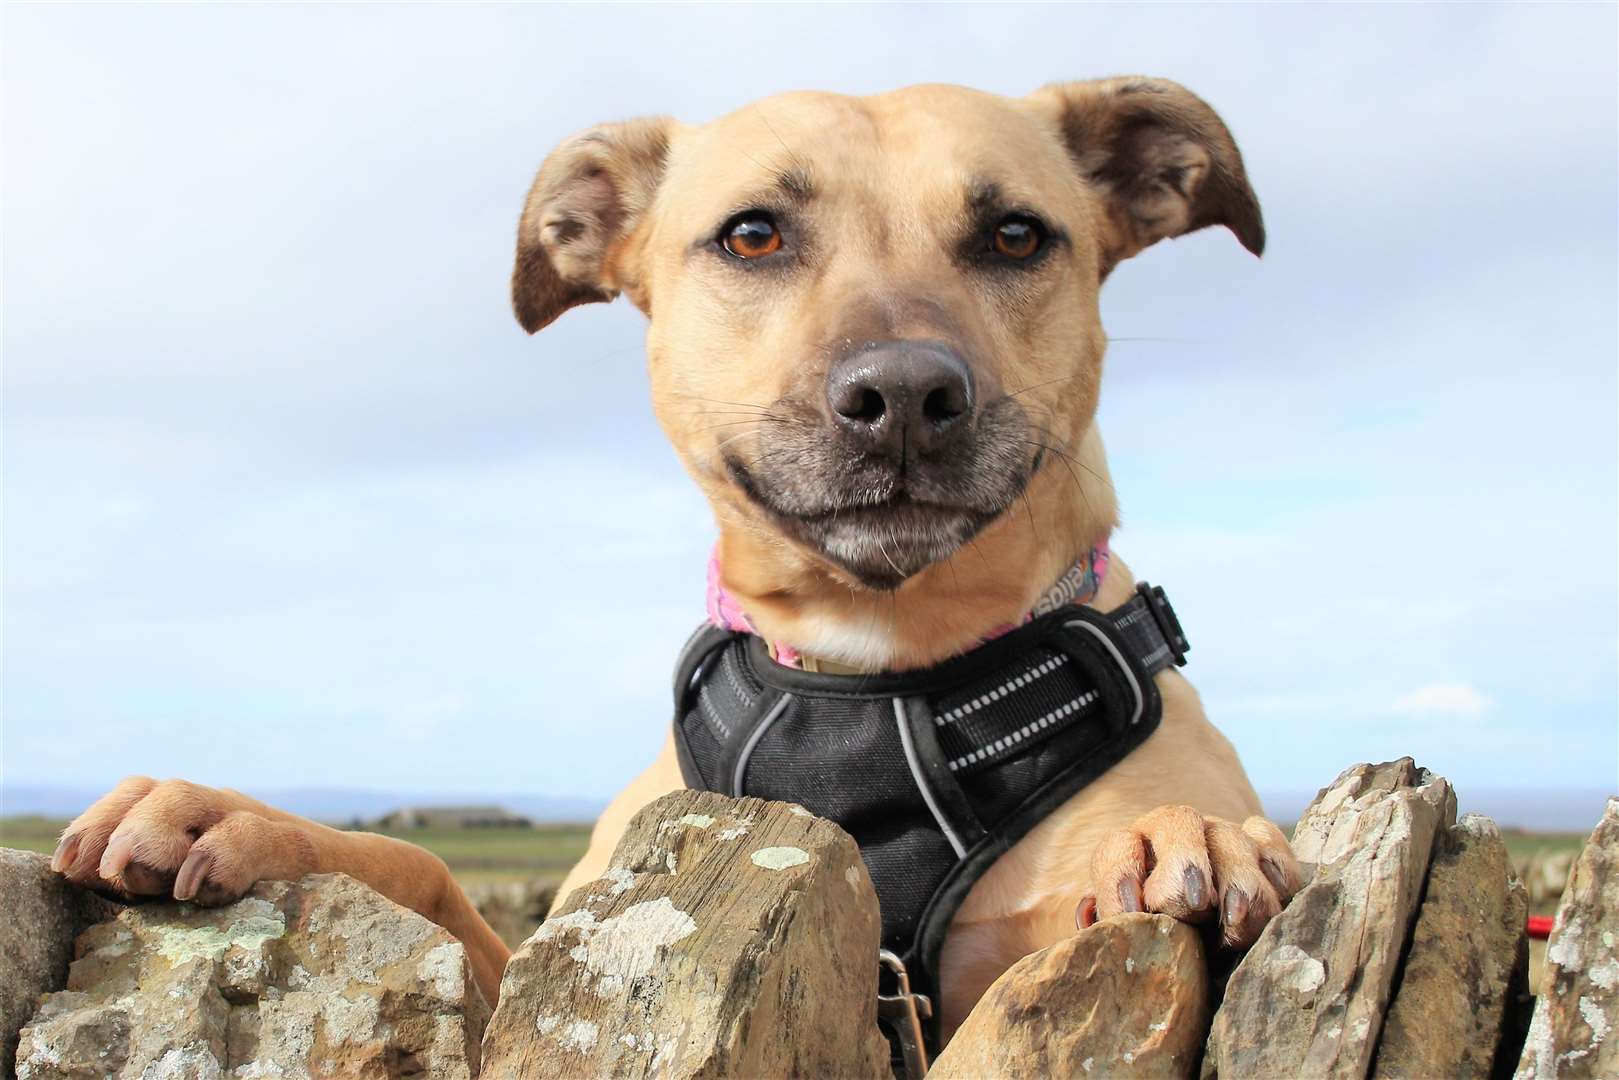 Keela is a loving dog who deserves a forever home say the Balmore staff. She loves playing with her toys.